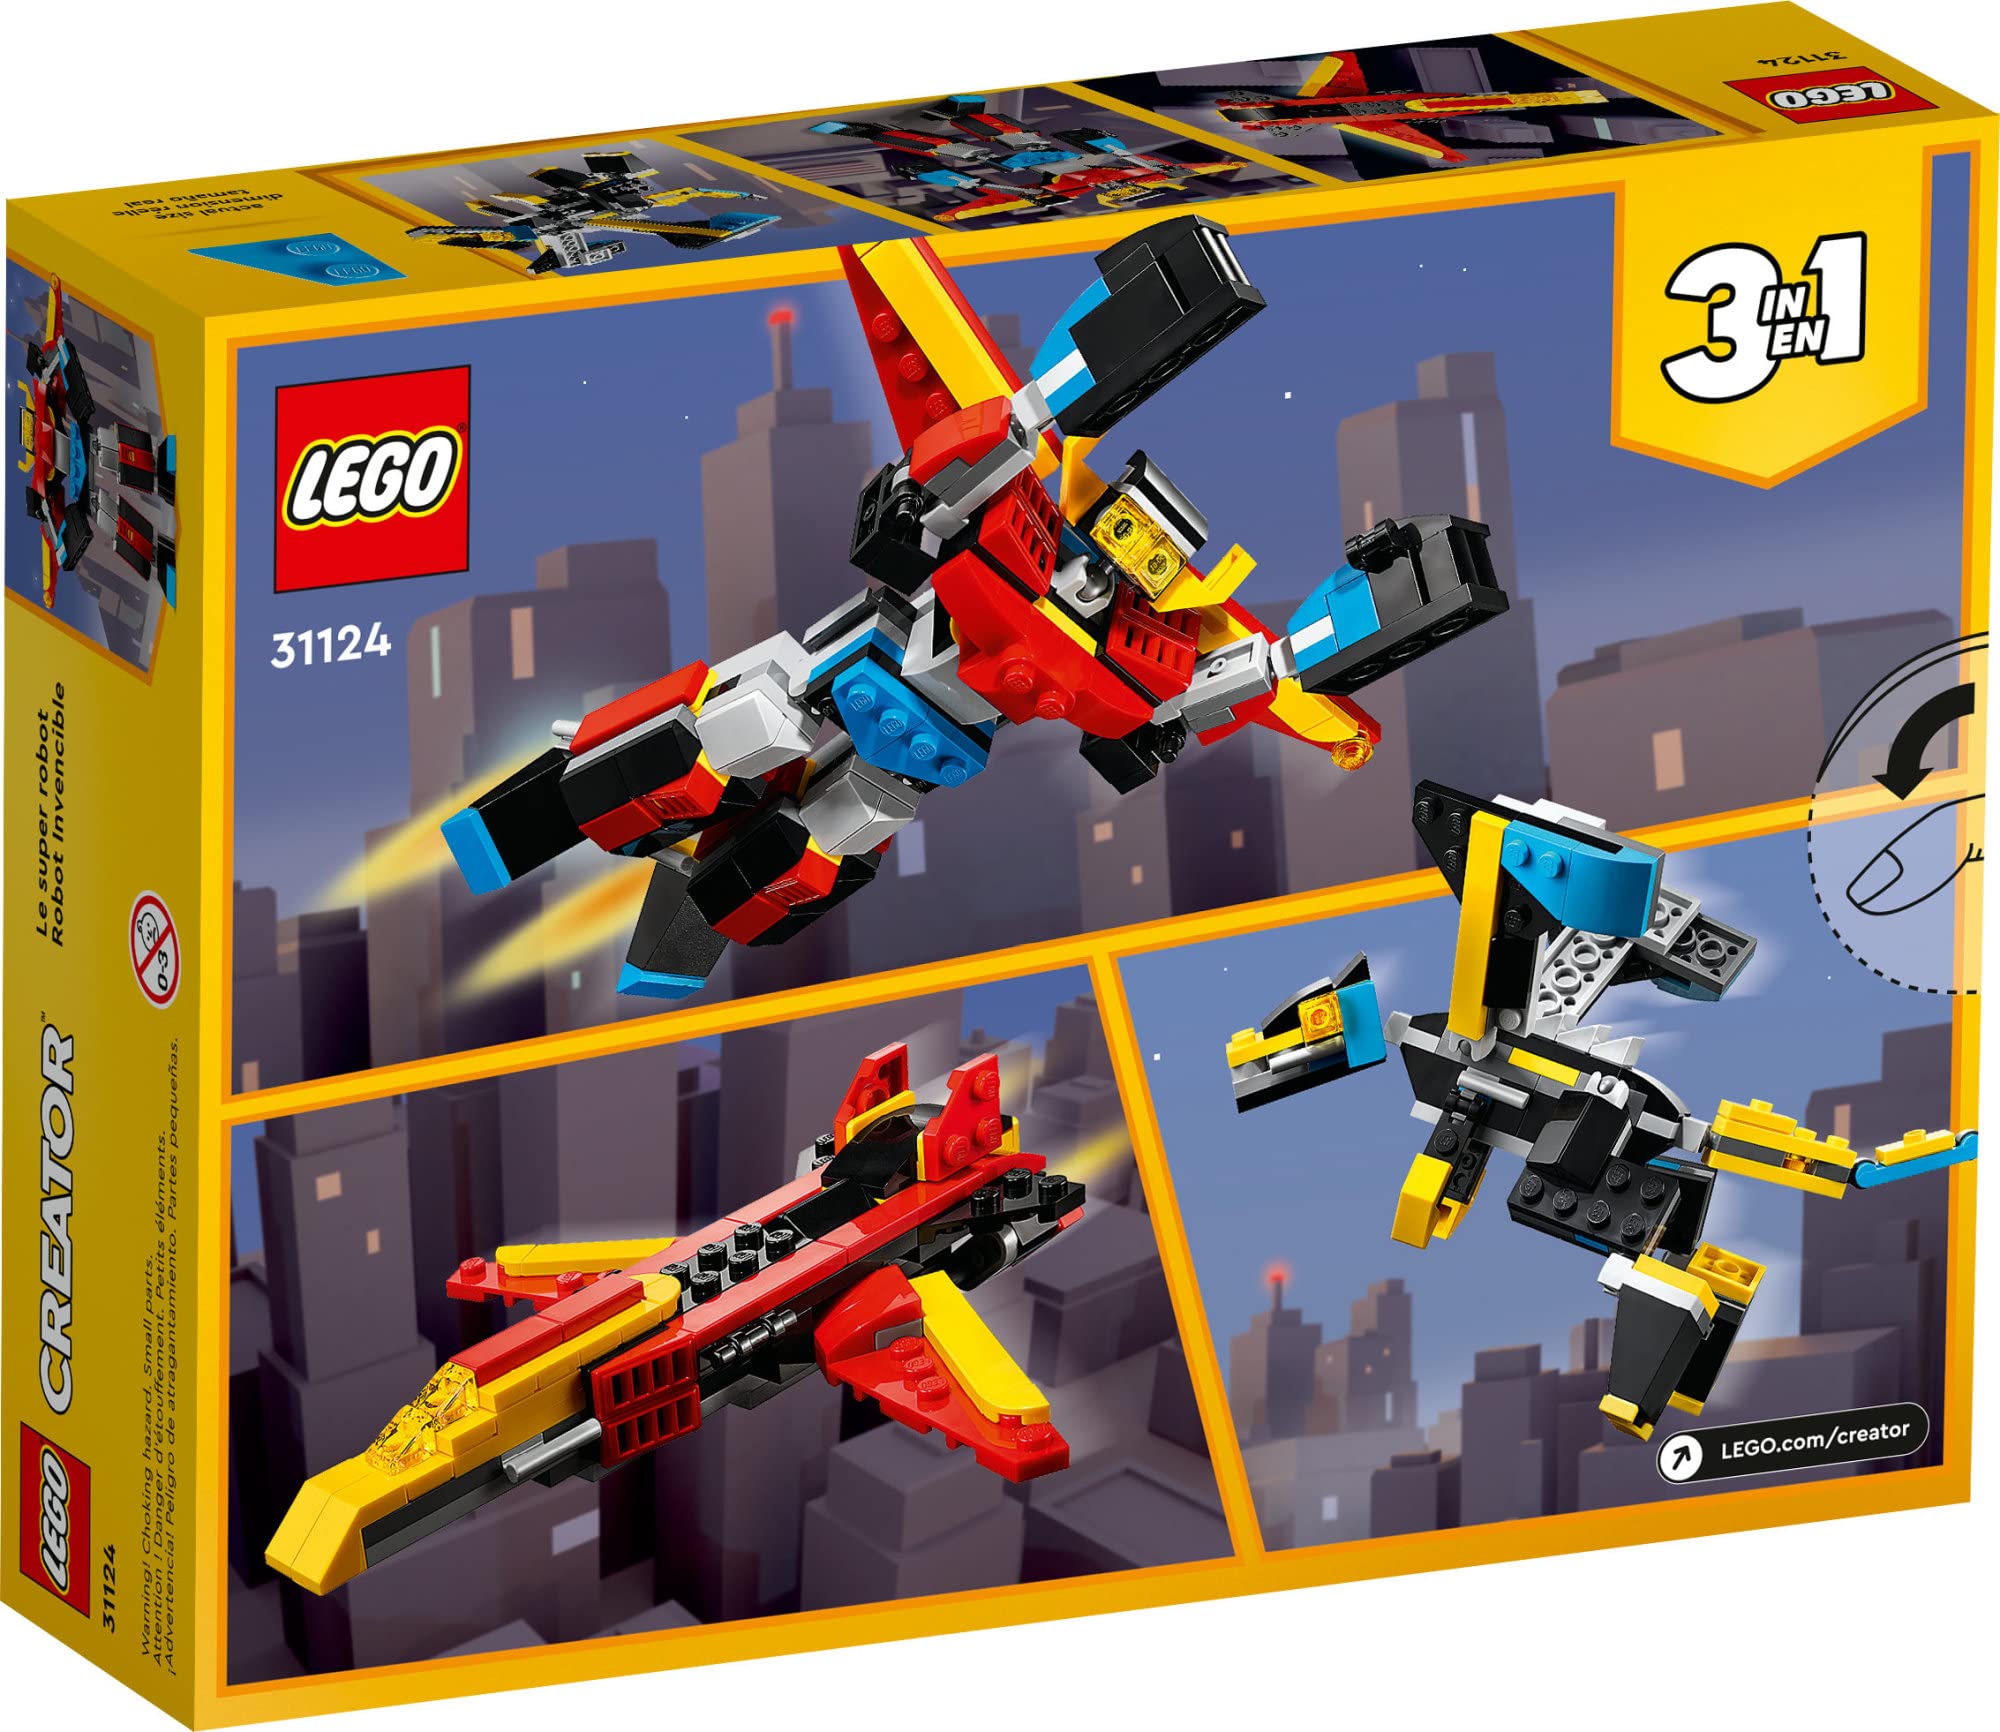 LEGO Creator 3in1 Super Robot 31124 Building Kit, Kids Can Build a Toy Robot, Toy Dragon, and Model Jet Plane, Creative Gift for Kids, Boys, Girls Age 7+ Years Old